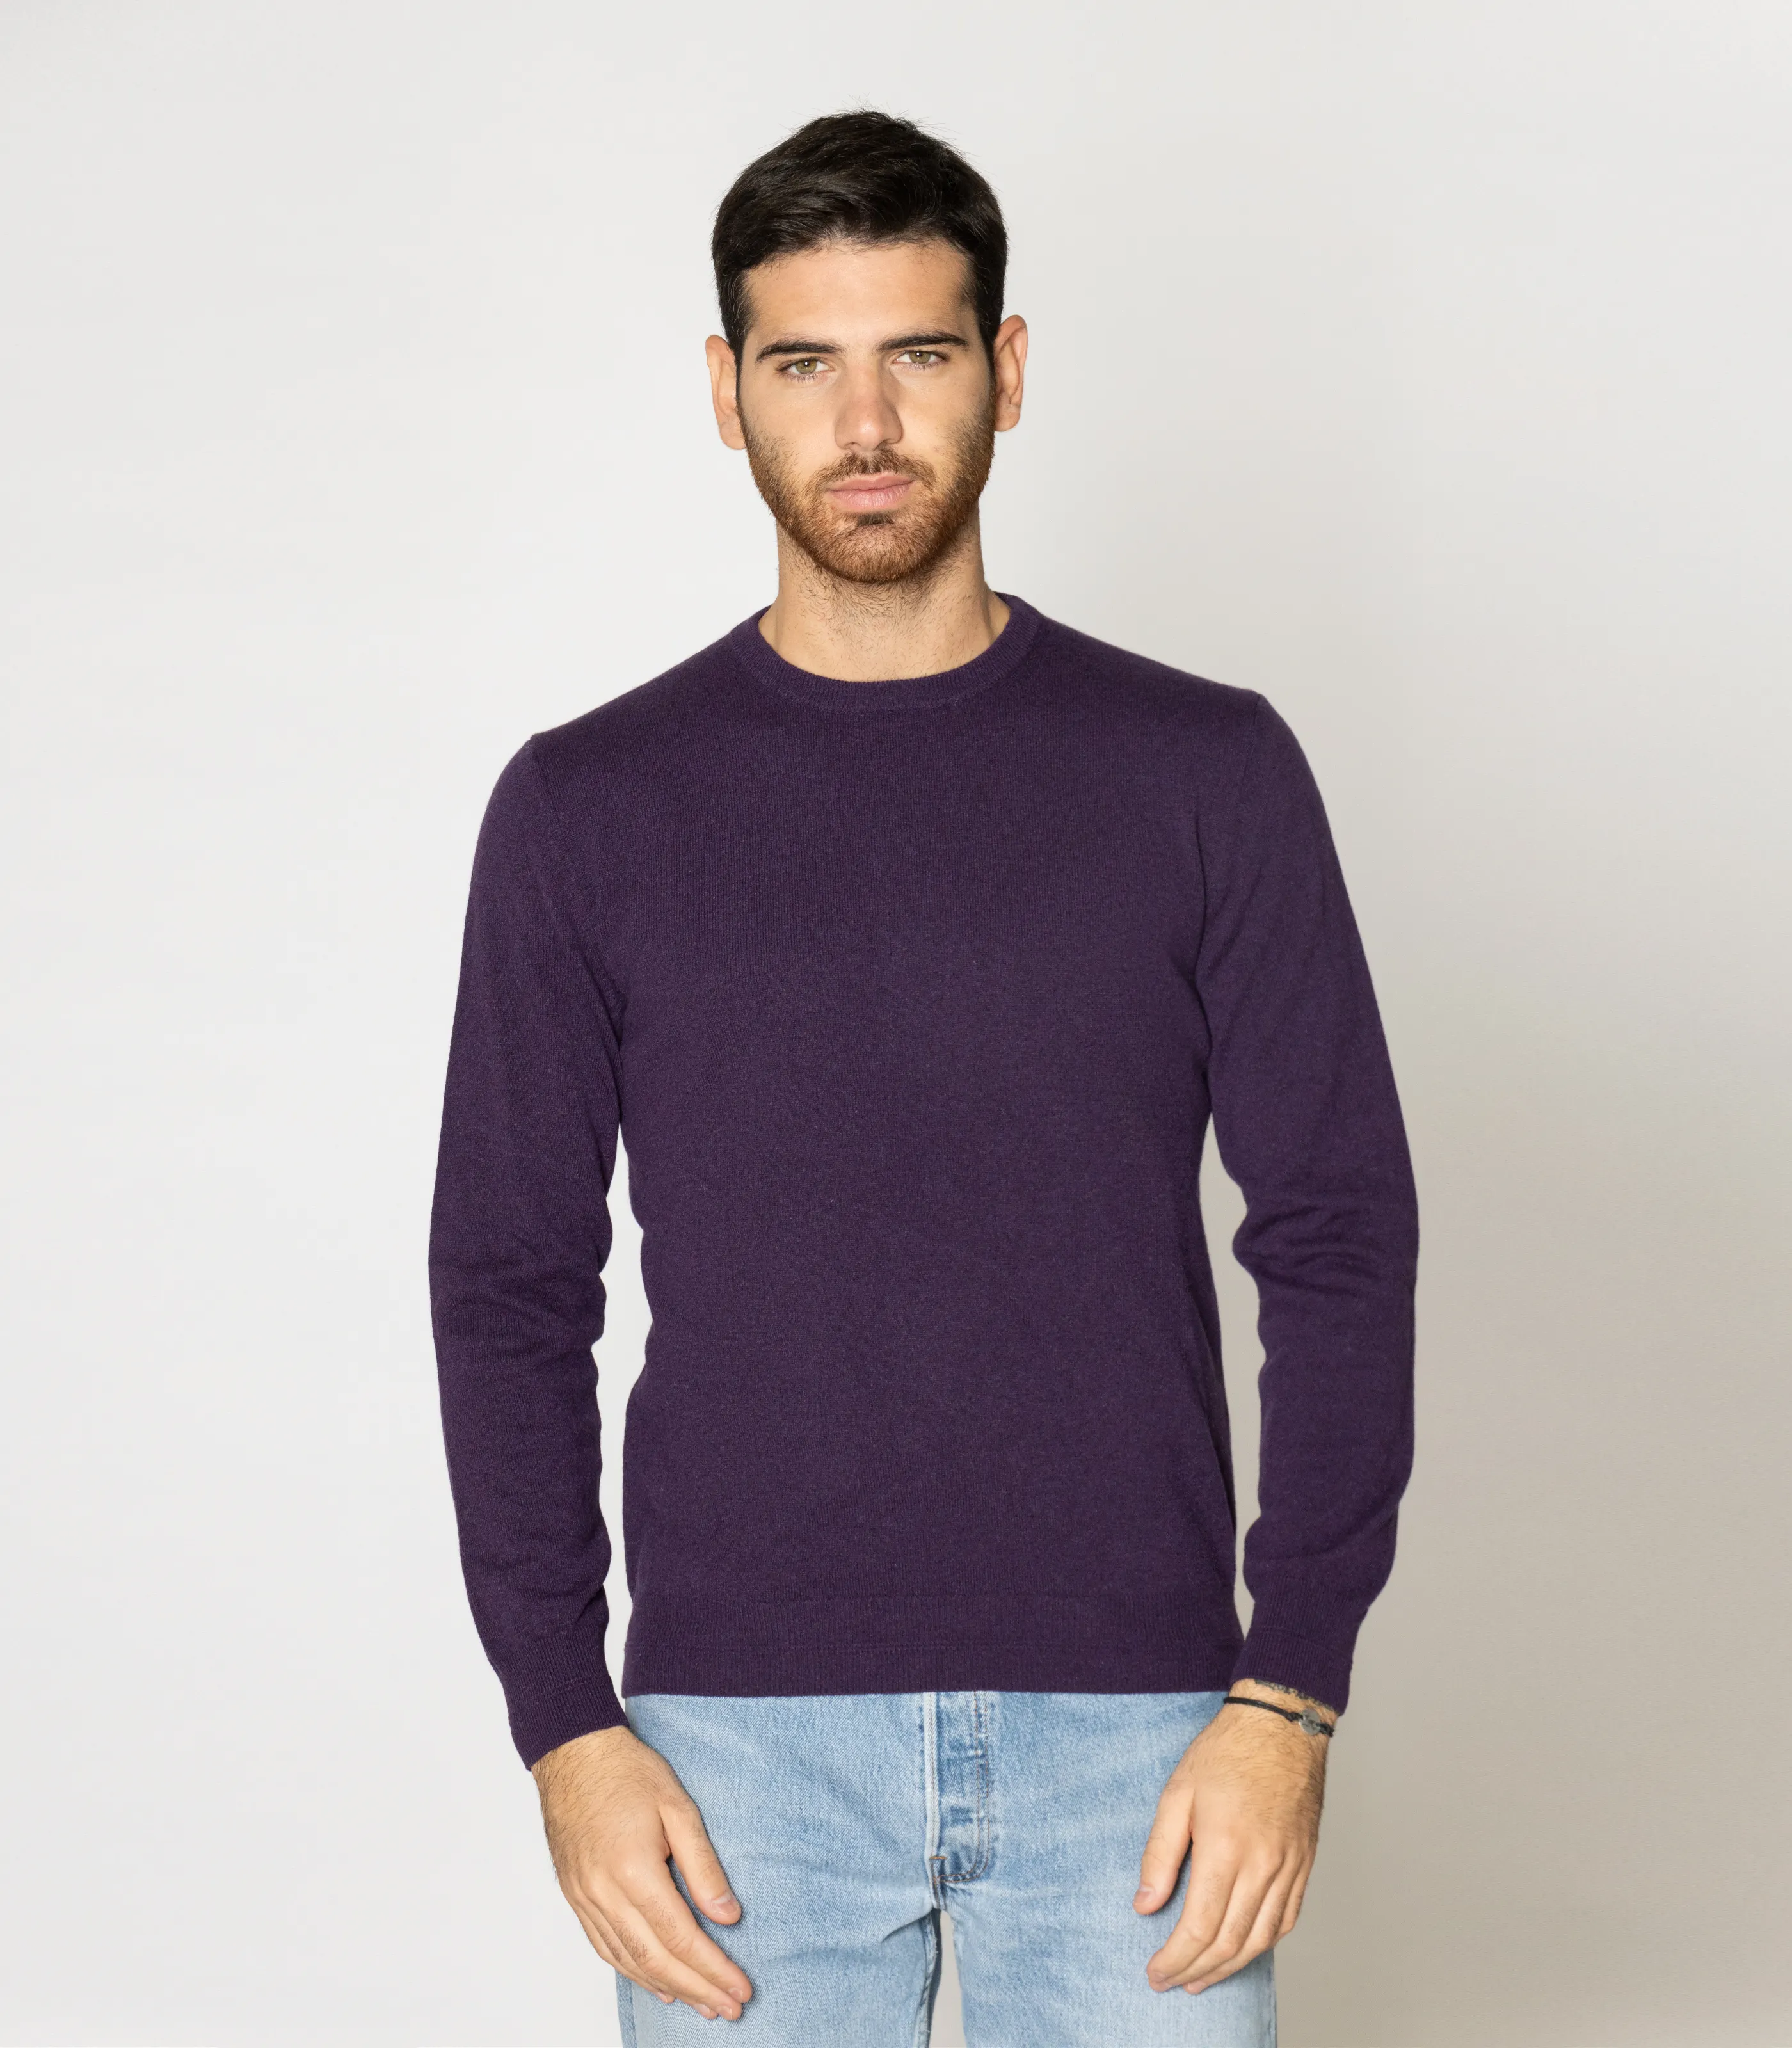 Made in Italy clothing 100% cashmere yarn men's sweaters crew neck violet sweater for winter